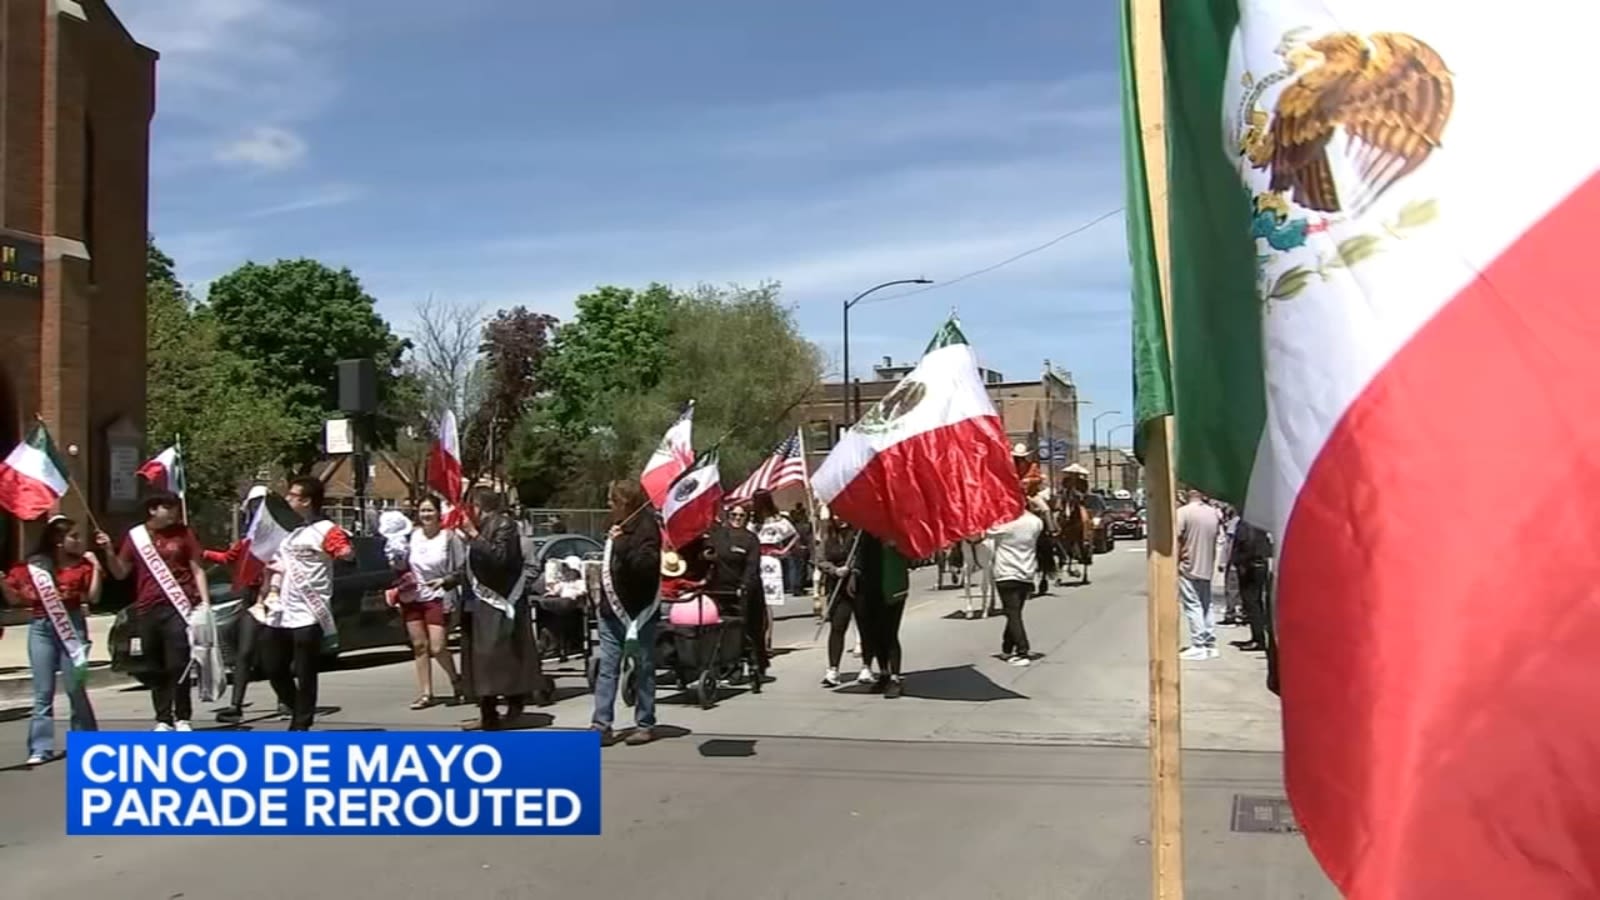 SW Side Cinco de Mayo Parade rerouted after nearby gang-related fights, arrests, Chicago police say